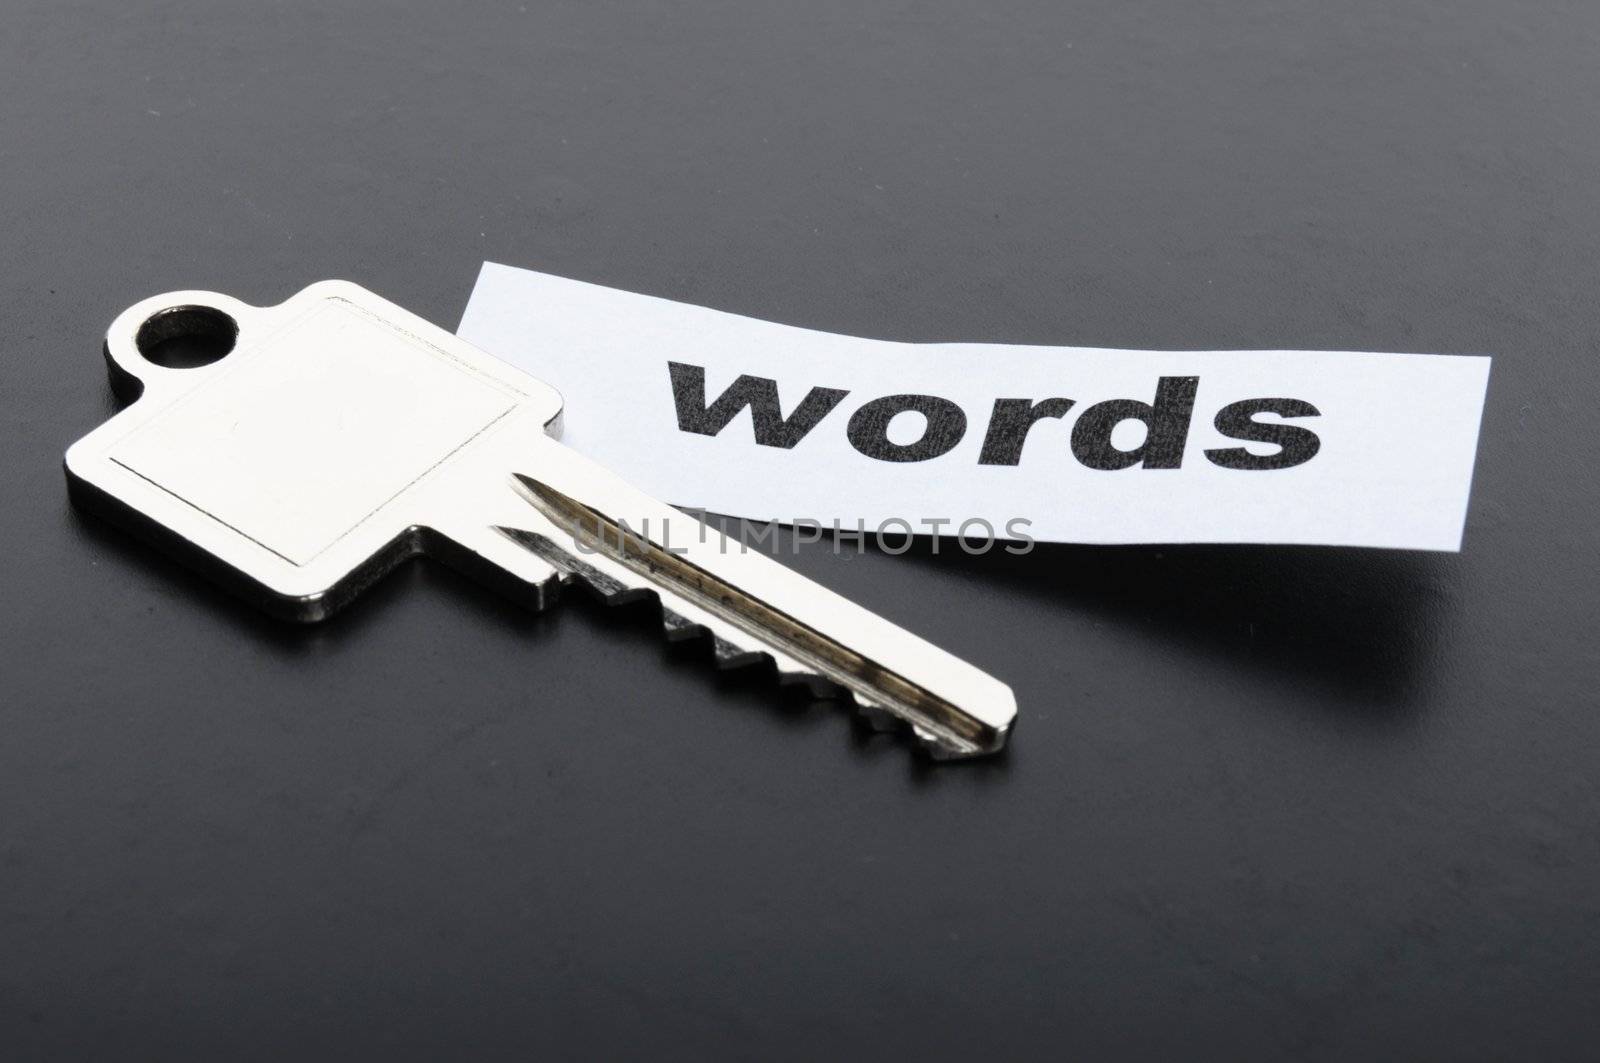 keywords metadata or seo concept with key and word